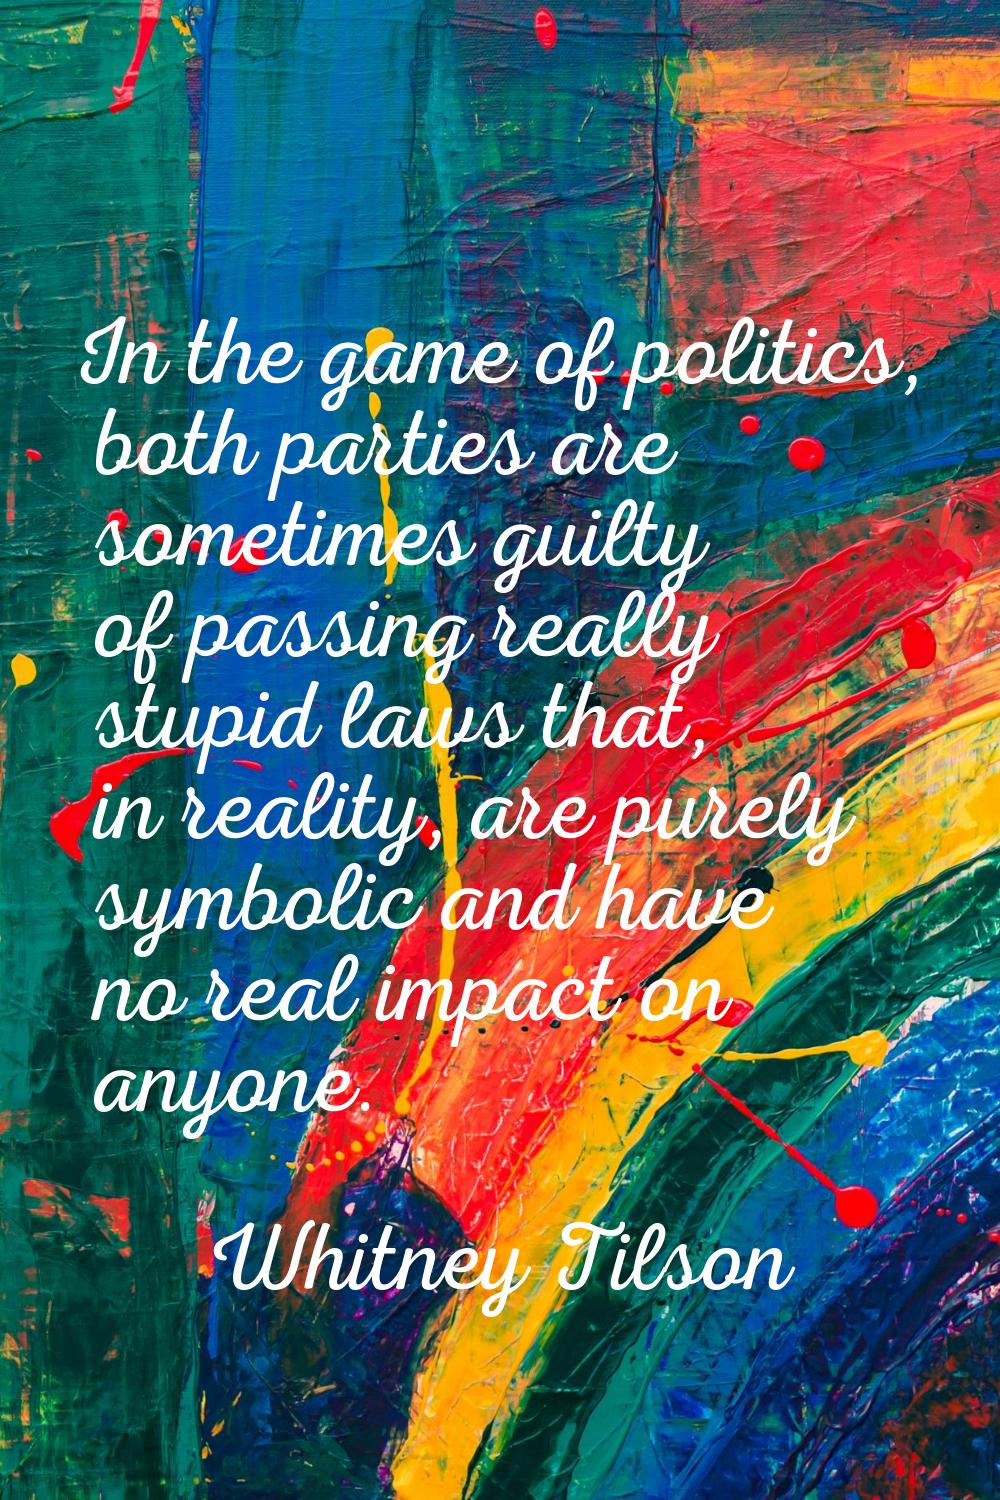 In the game of politics, both parties are sometimes guilty of passing really stupid laws that, in r